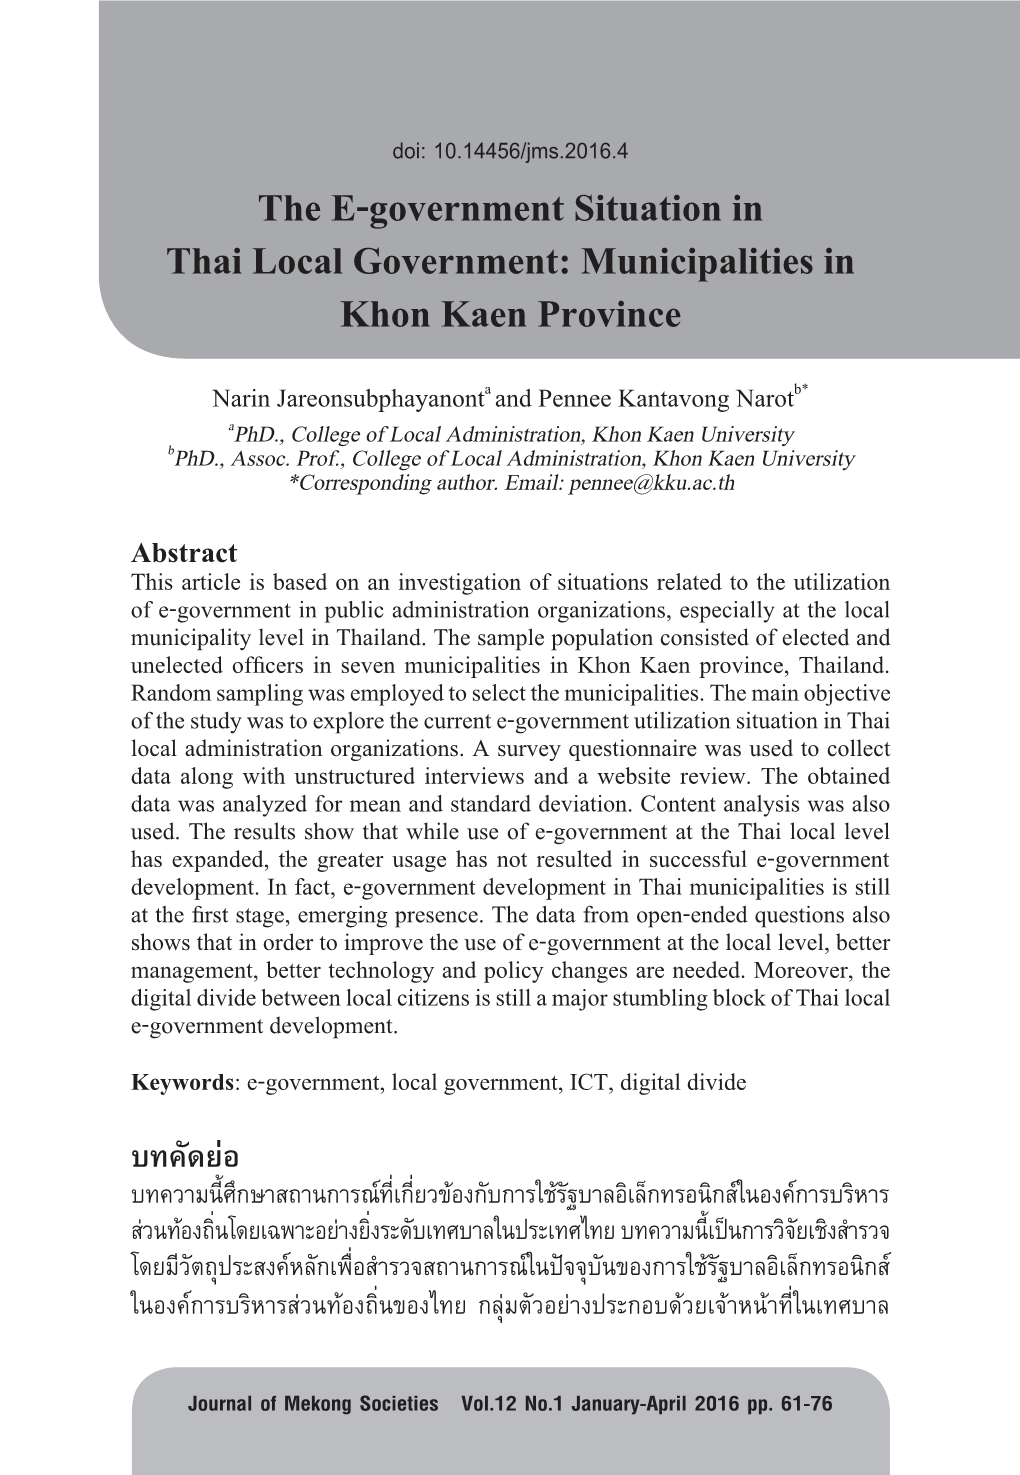 The E-Government Situation in Thai Local Government: Municipalities in Khon Kaen Province